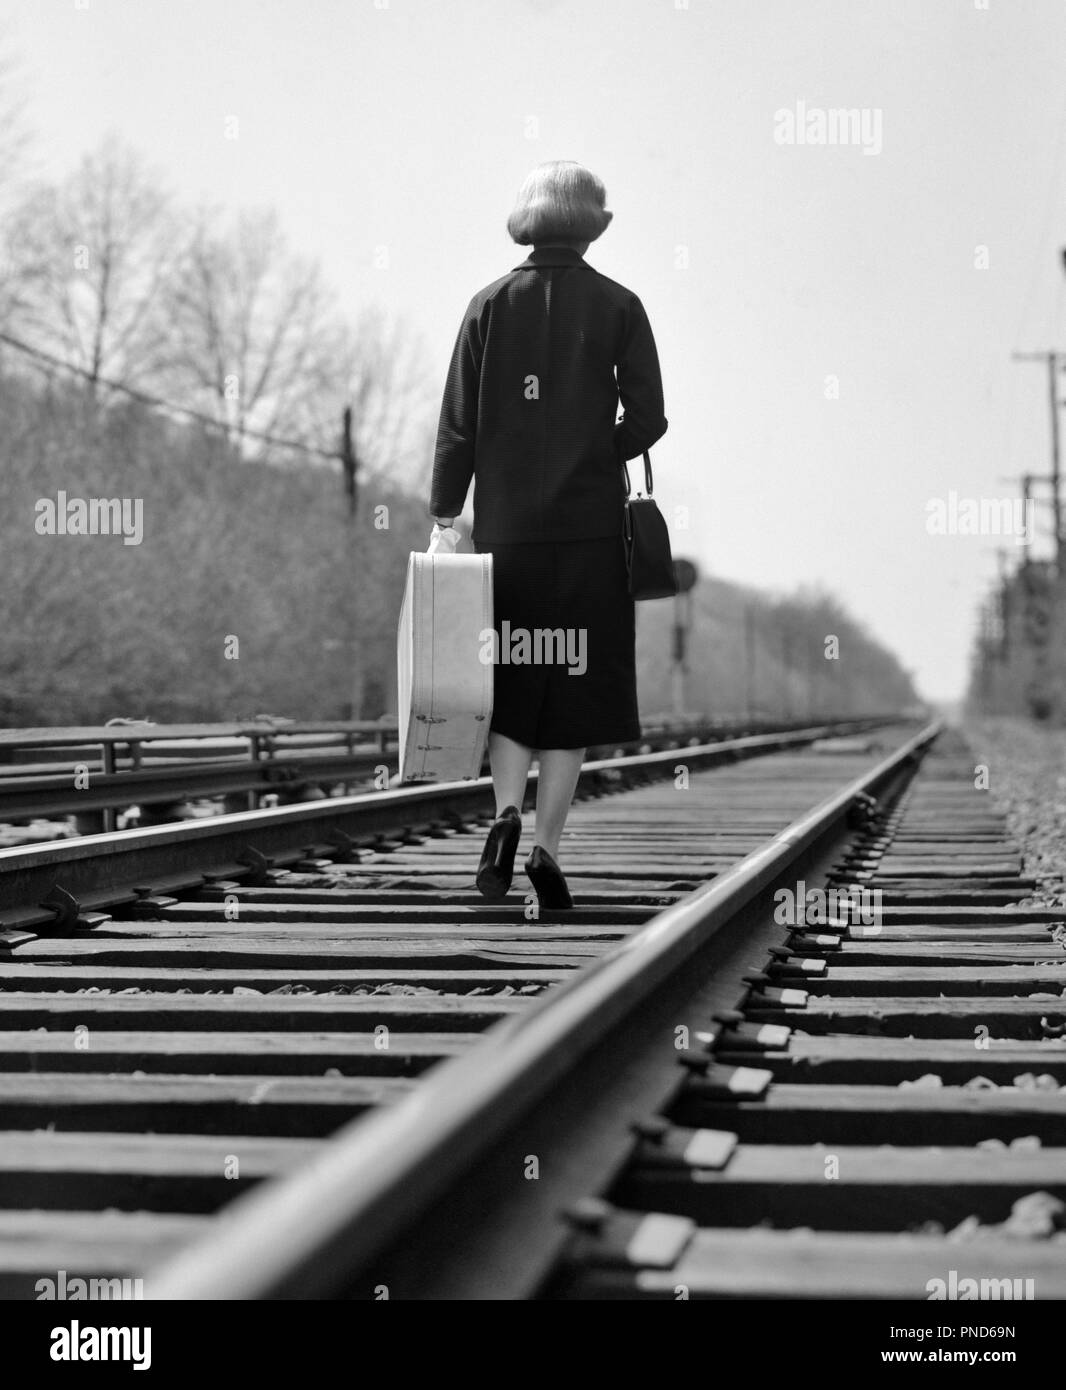 1950s 1960s BATTERED WOMAN ESCAPING BACK TO CAMERA WALKING DOWN RAILROAD TRACKS CARRYING SUITCASE LEAVING - s10060 DEB001 HARS FULL-LENGTH PERSONS GROWN-UP RISK SYMBOLS LEAVE B&W SADNESS TRACKS SINGLE FIGURE FREEDOM RUNAWAY VICTIM STRENGTH COURAGE CHOICE FED UP DIRECTION RIGHTS FINISHED HURT HURTING BACK TO CAMERA DONE SURVIVOR CONCEPTUAL ESCAPE SURVIVING DEB001 SYMBOLIC BATTERED GONE MID-ADULT MID-ADULT WOMAN MISERABLE PEOPLE ADULTS SYNDROME BLACK AND WHITE DESPERATE HAND BAG OLD FASHIONED REPRESENTATION Stock Photo